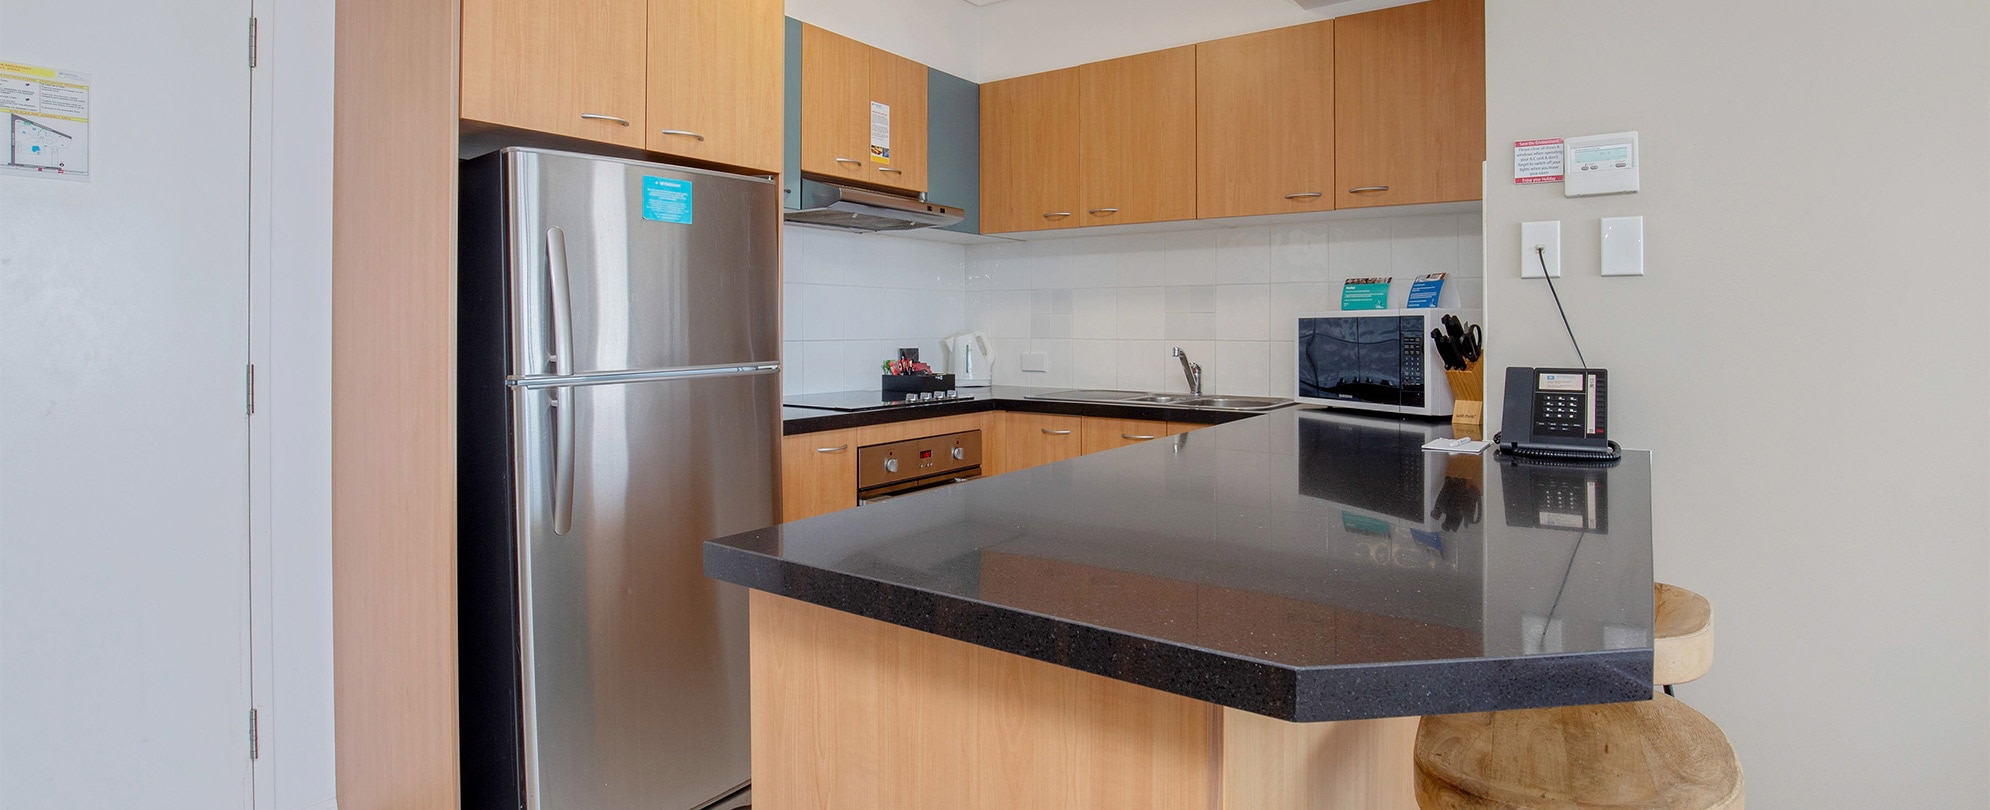 The kitchen of a Club Wyndham Kirra Beach standard suite with a full fridge, microwave, stove, countertop bar, and sink.